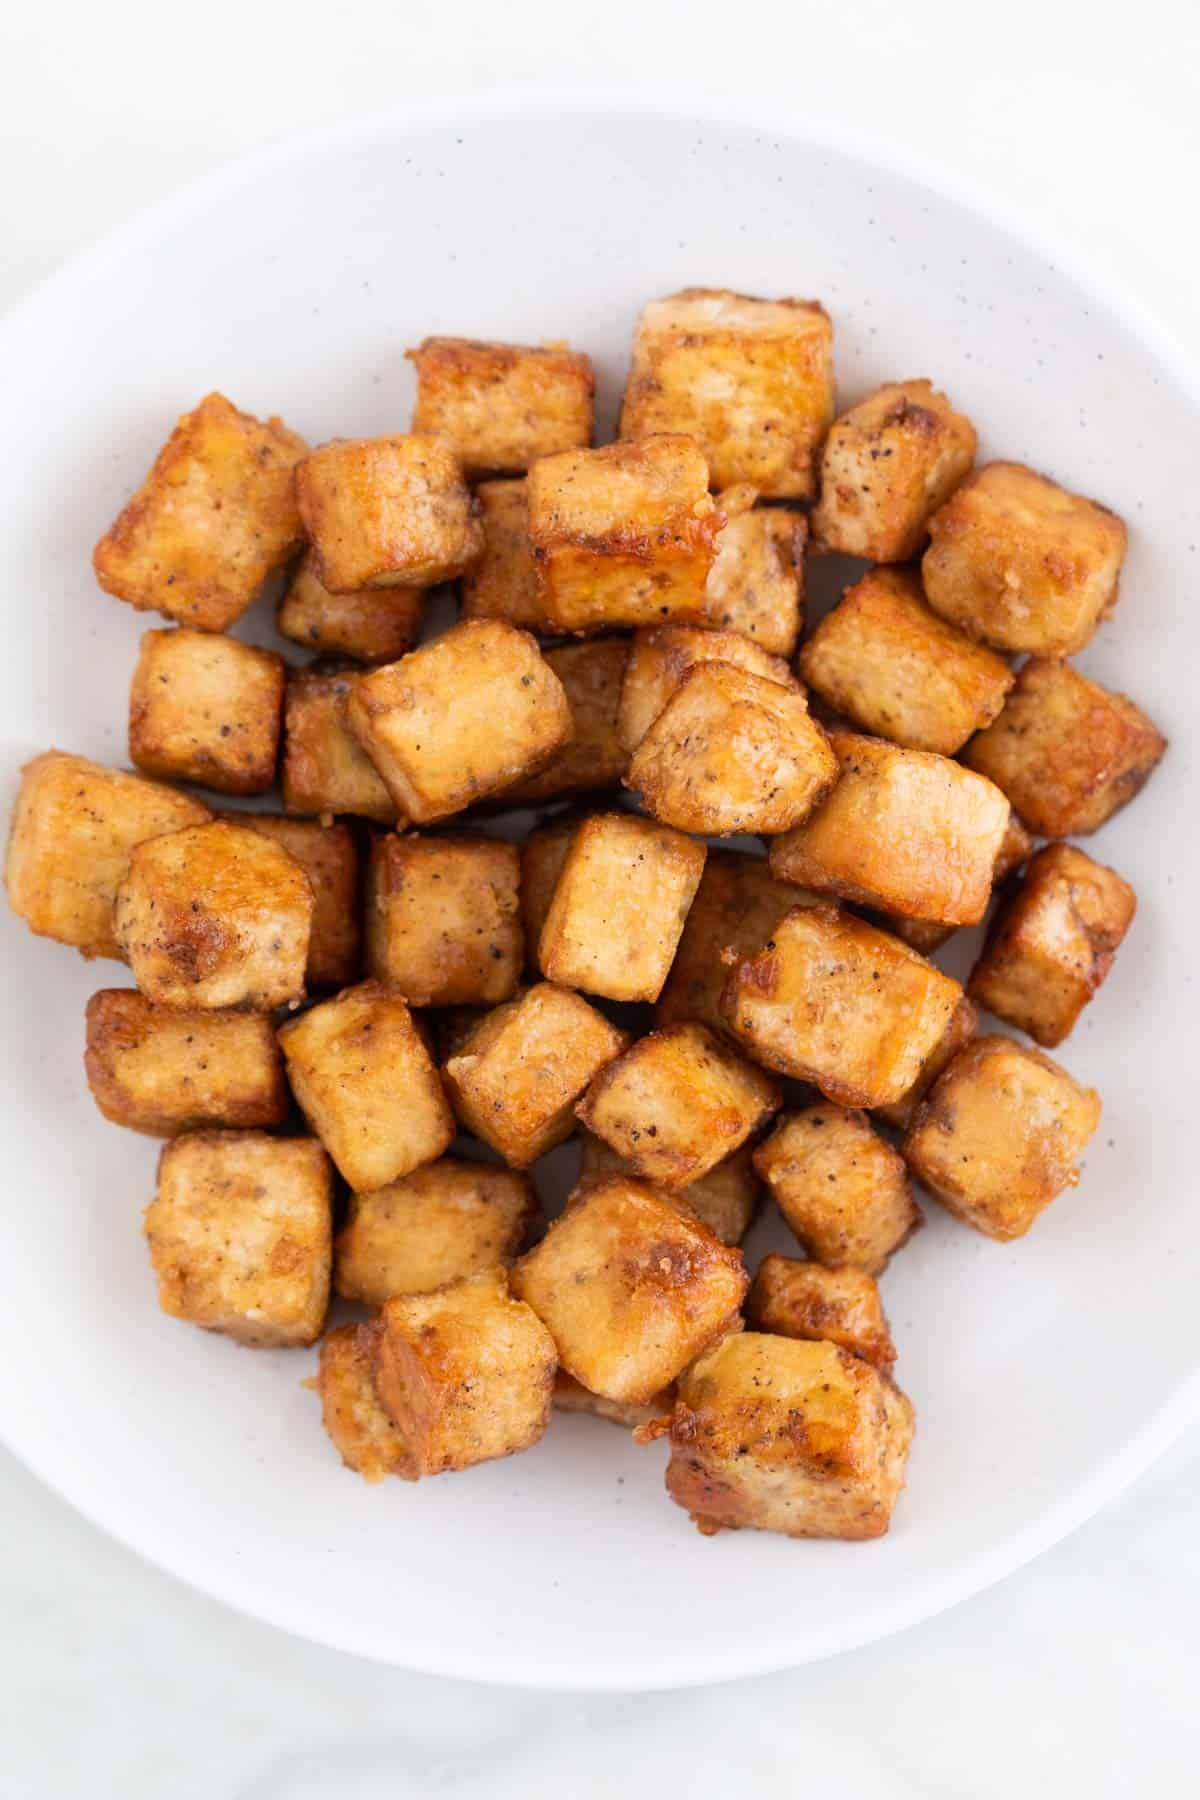 Overview of a dish with pan-fried tofu cubes.